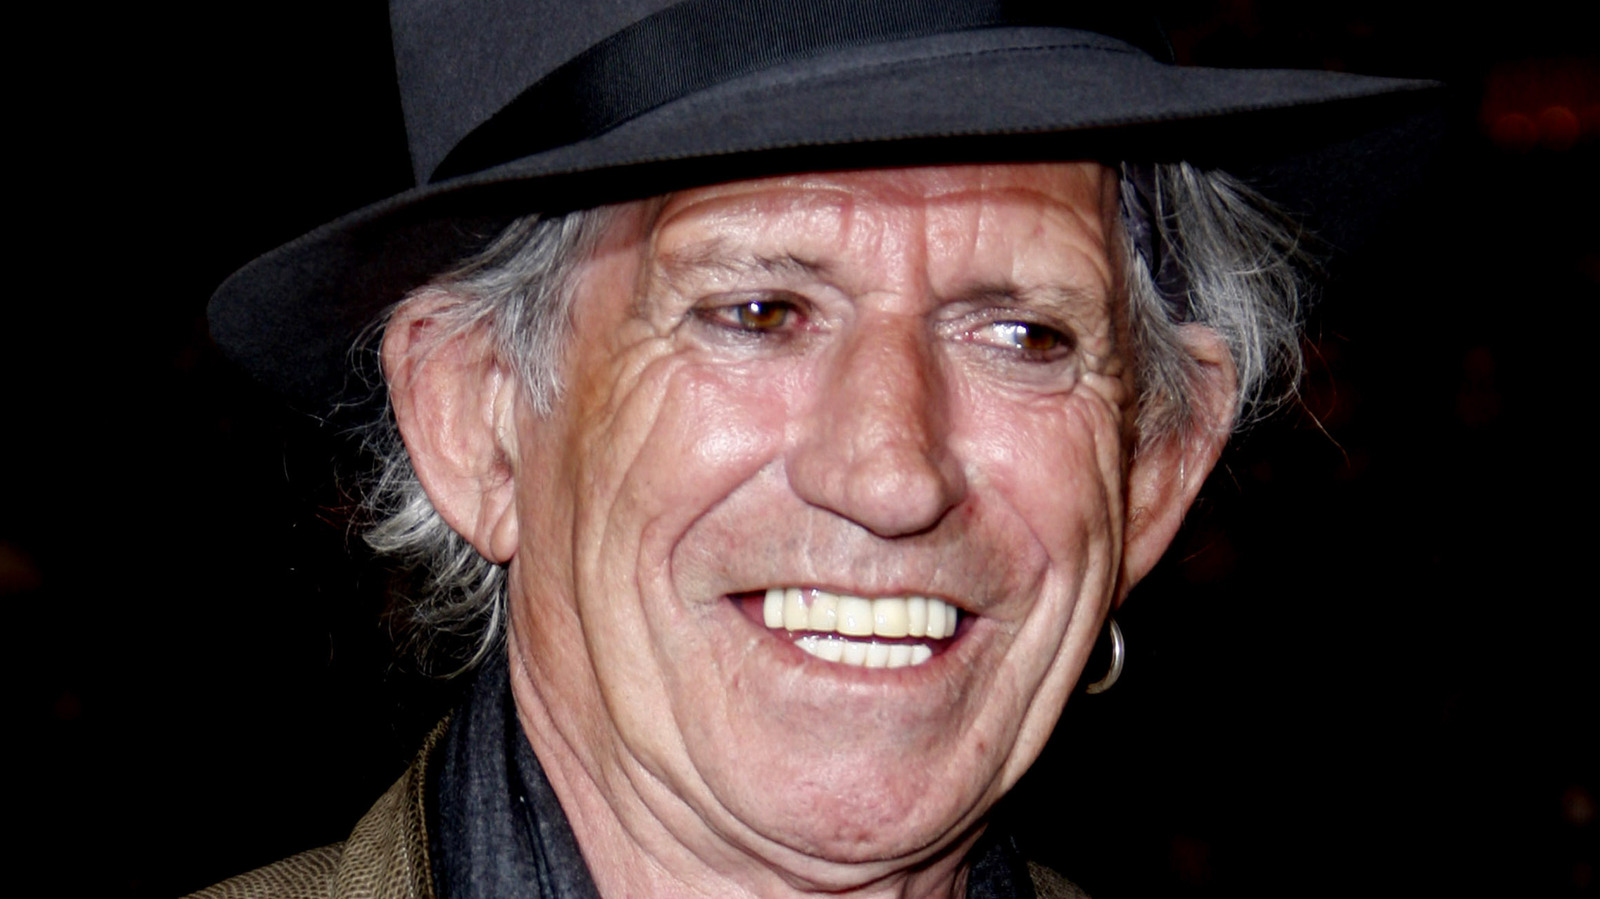 The Moment In Keith Richards' Career When He Went Too Far